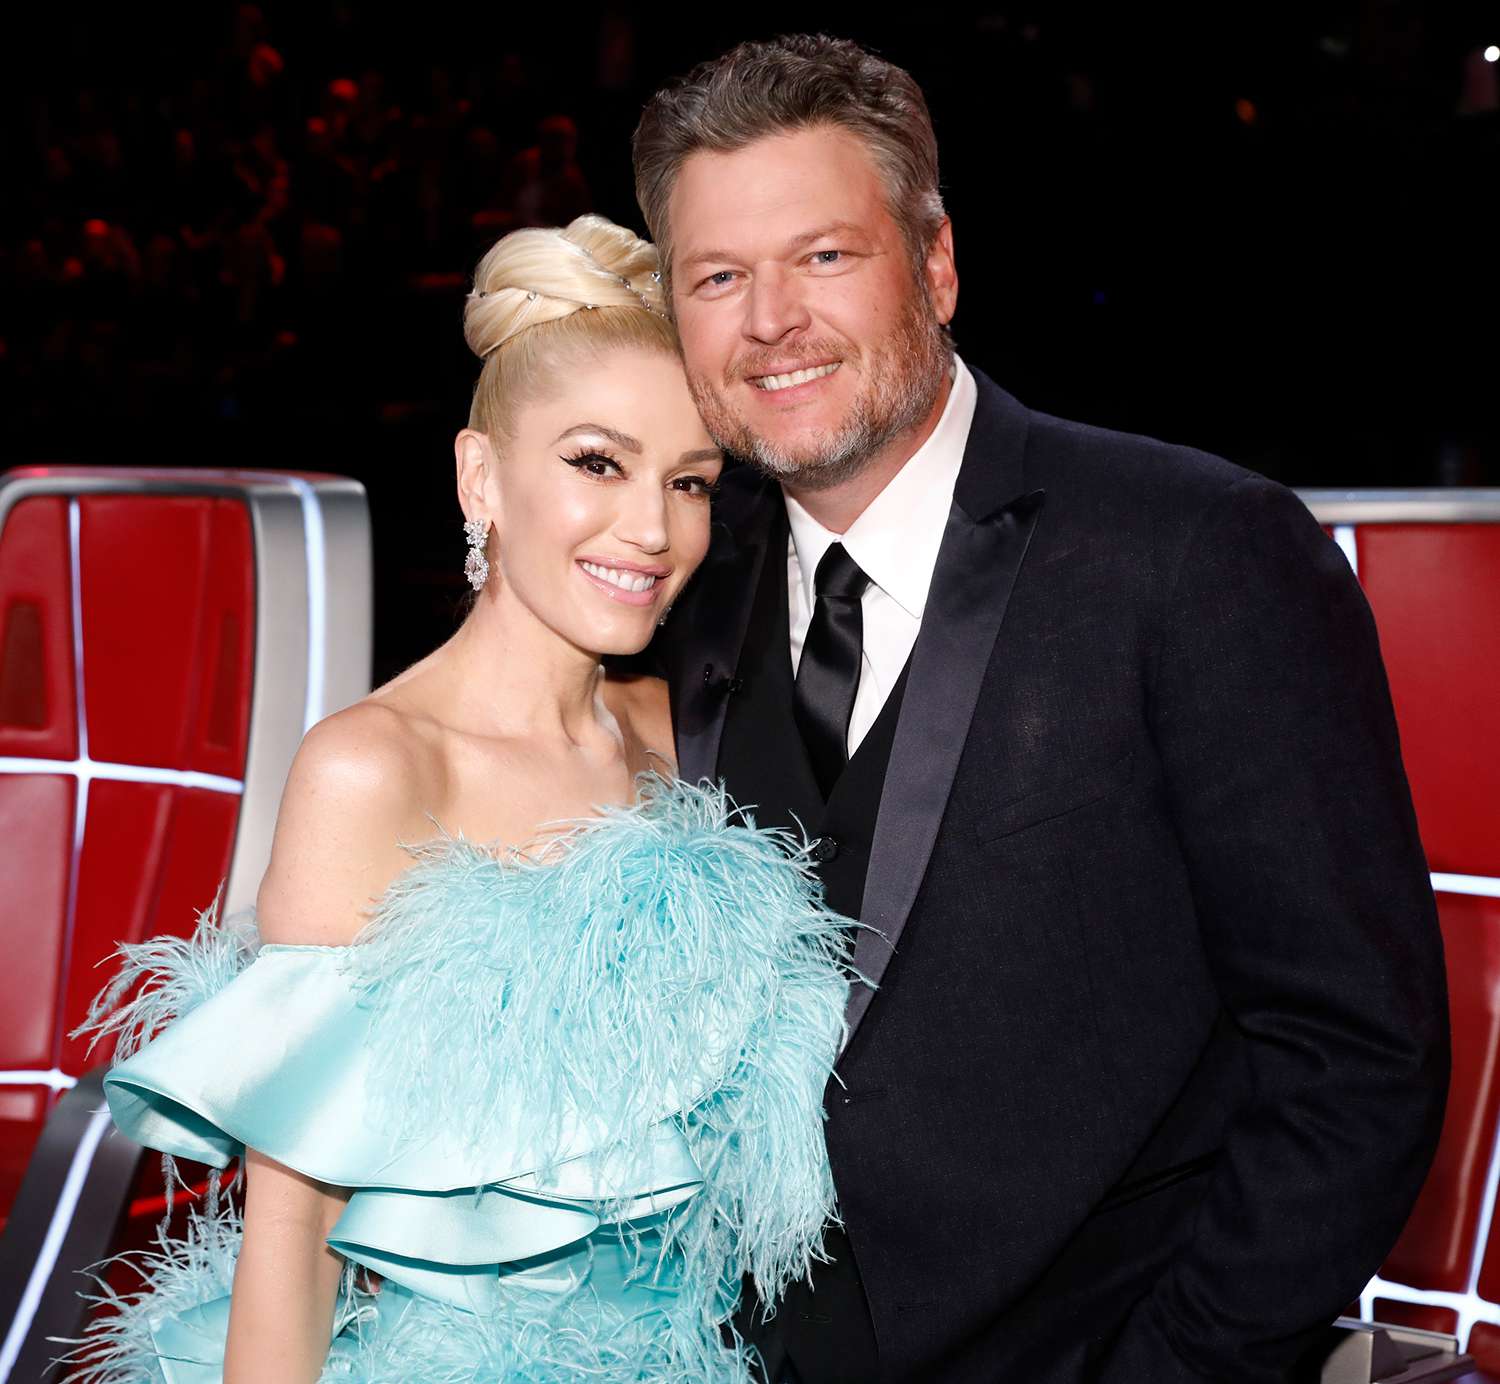 Gwen Stefani Says Meeting Blake Shelton Helped Her Embrace Her Feminine Style ‘More Than Ever’